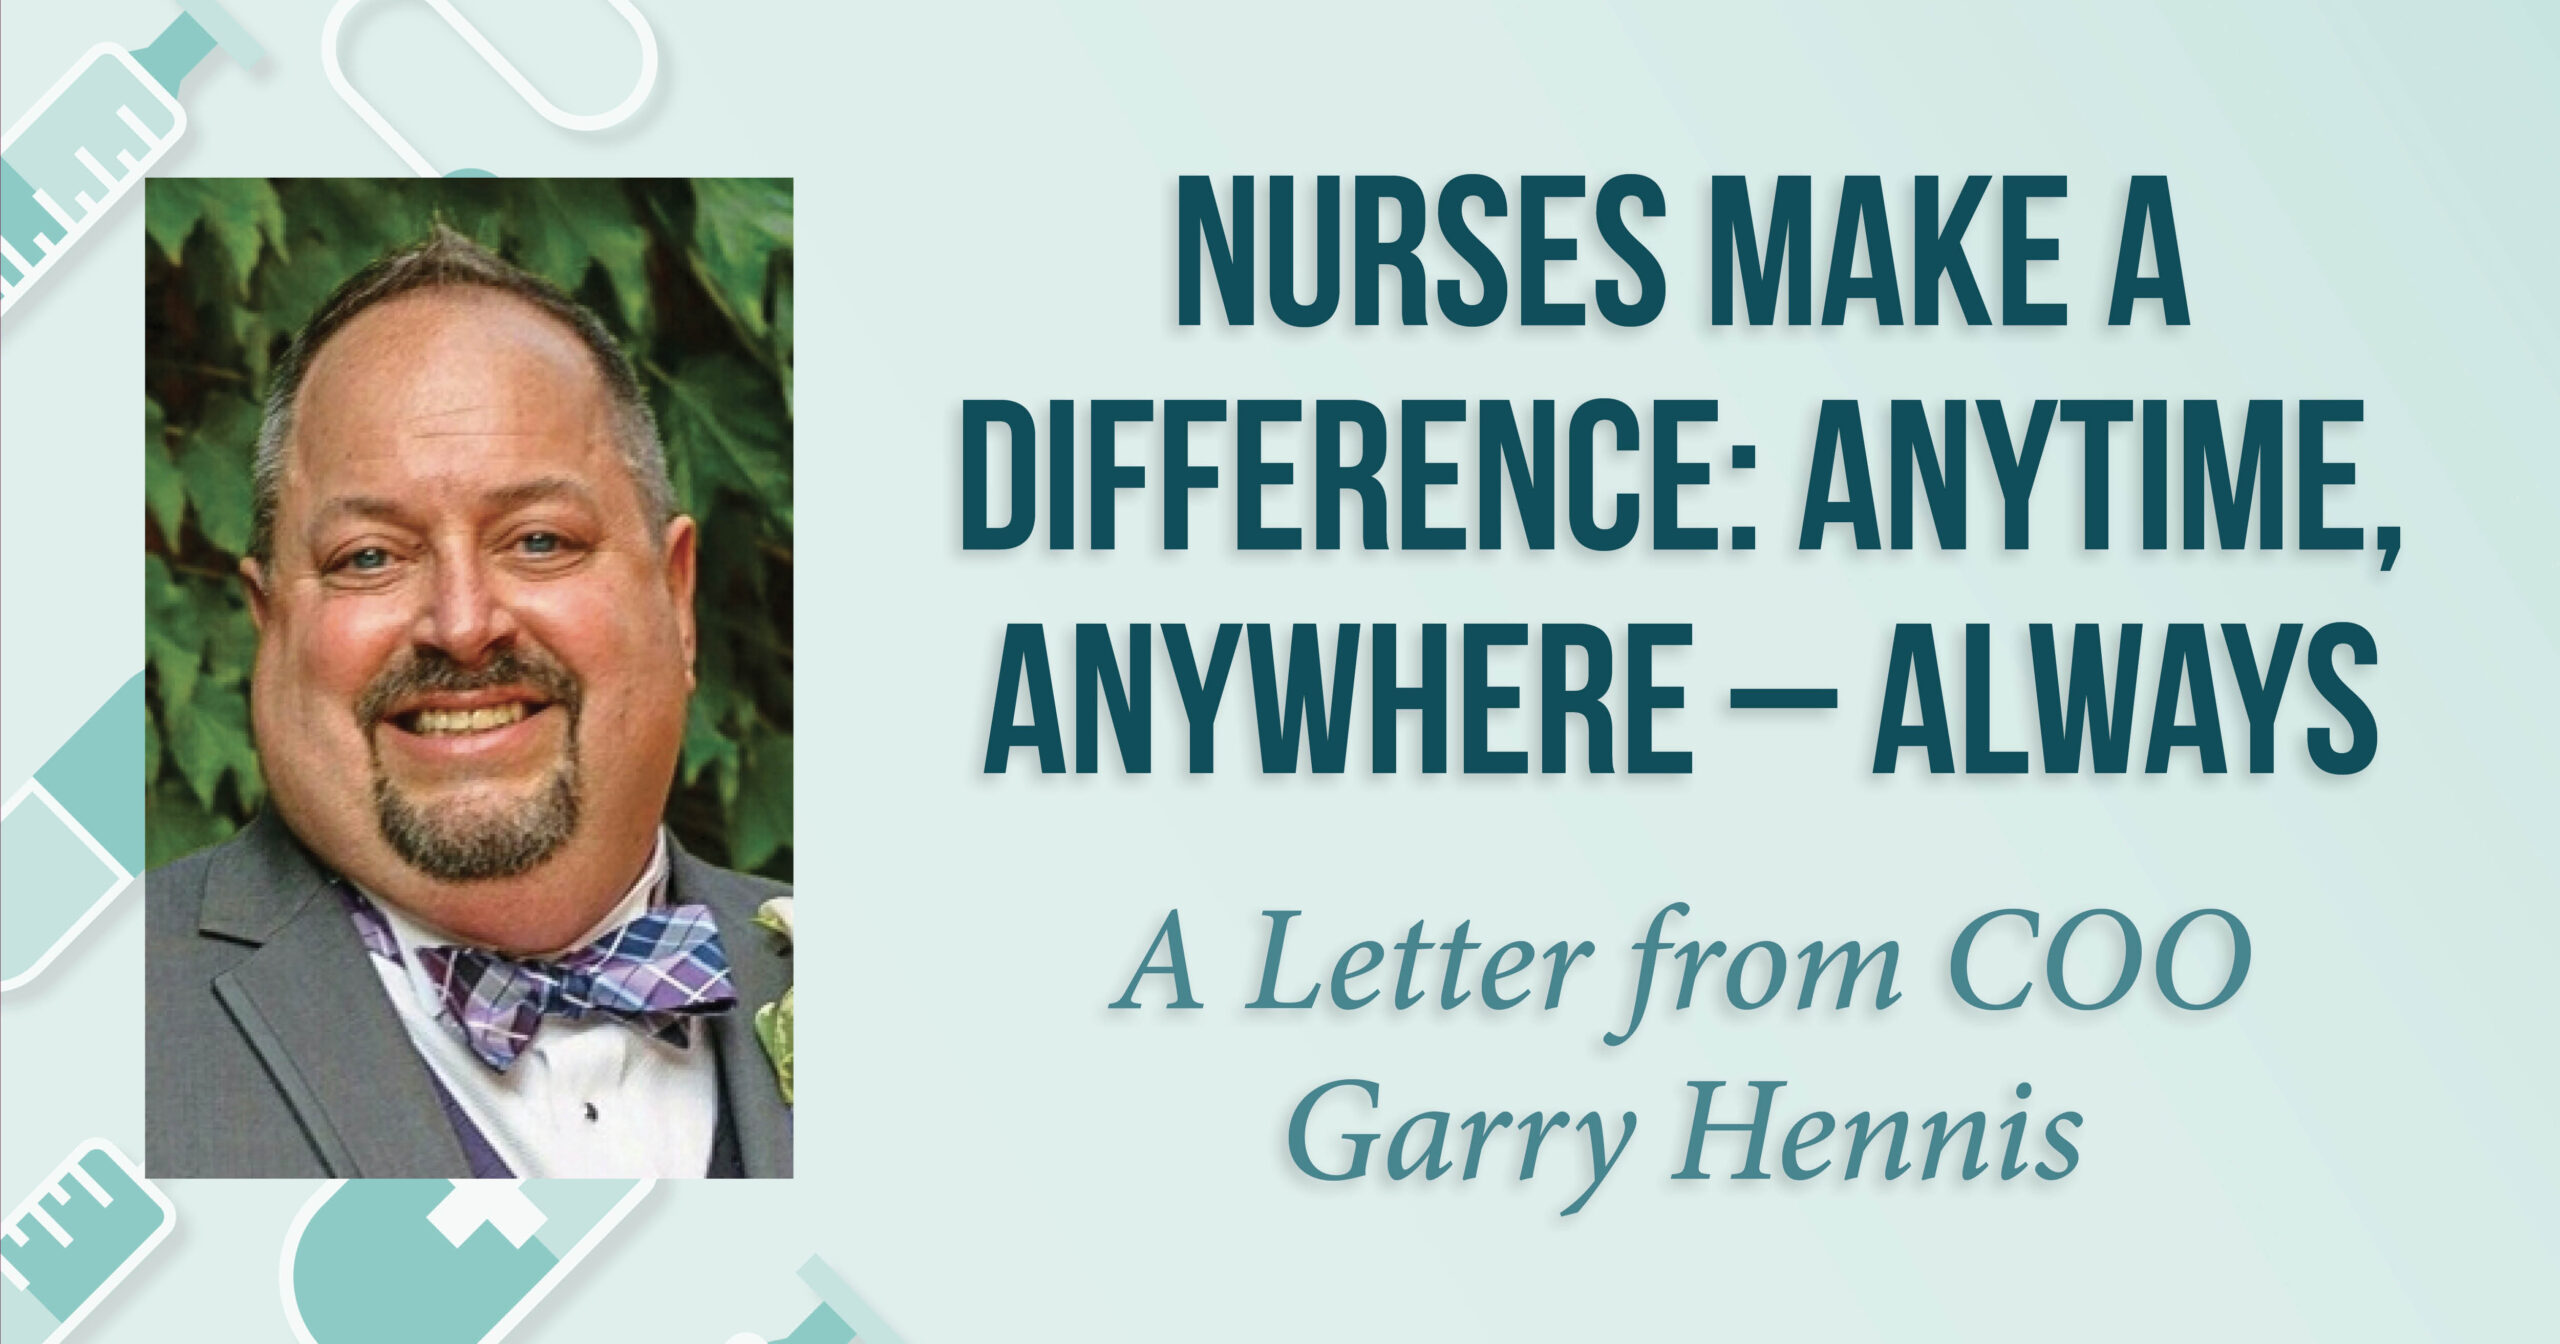 Nurses Make a Difference: Anytime, Anywhere – Always, A Letter from COO Garry Hennis